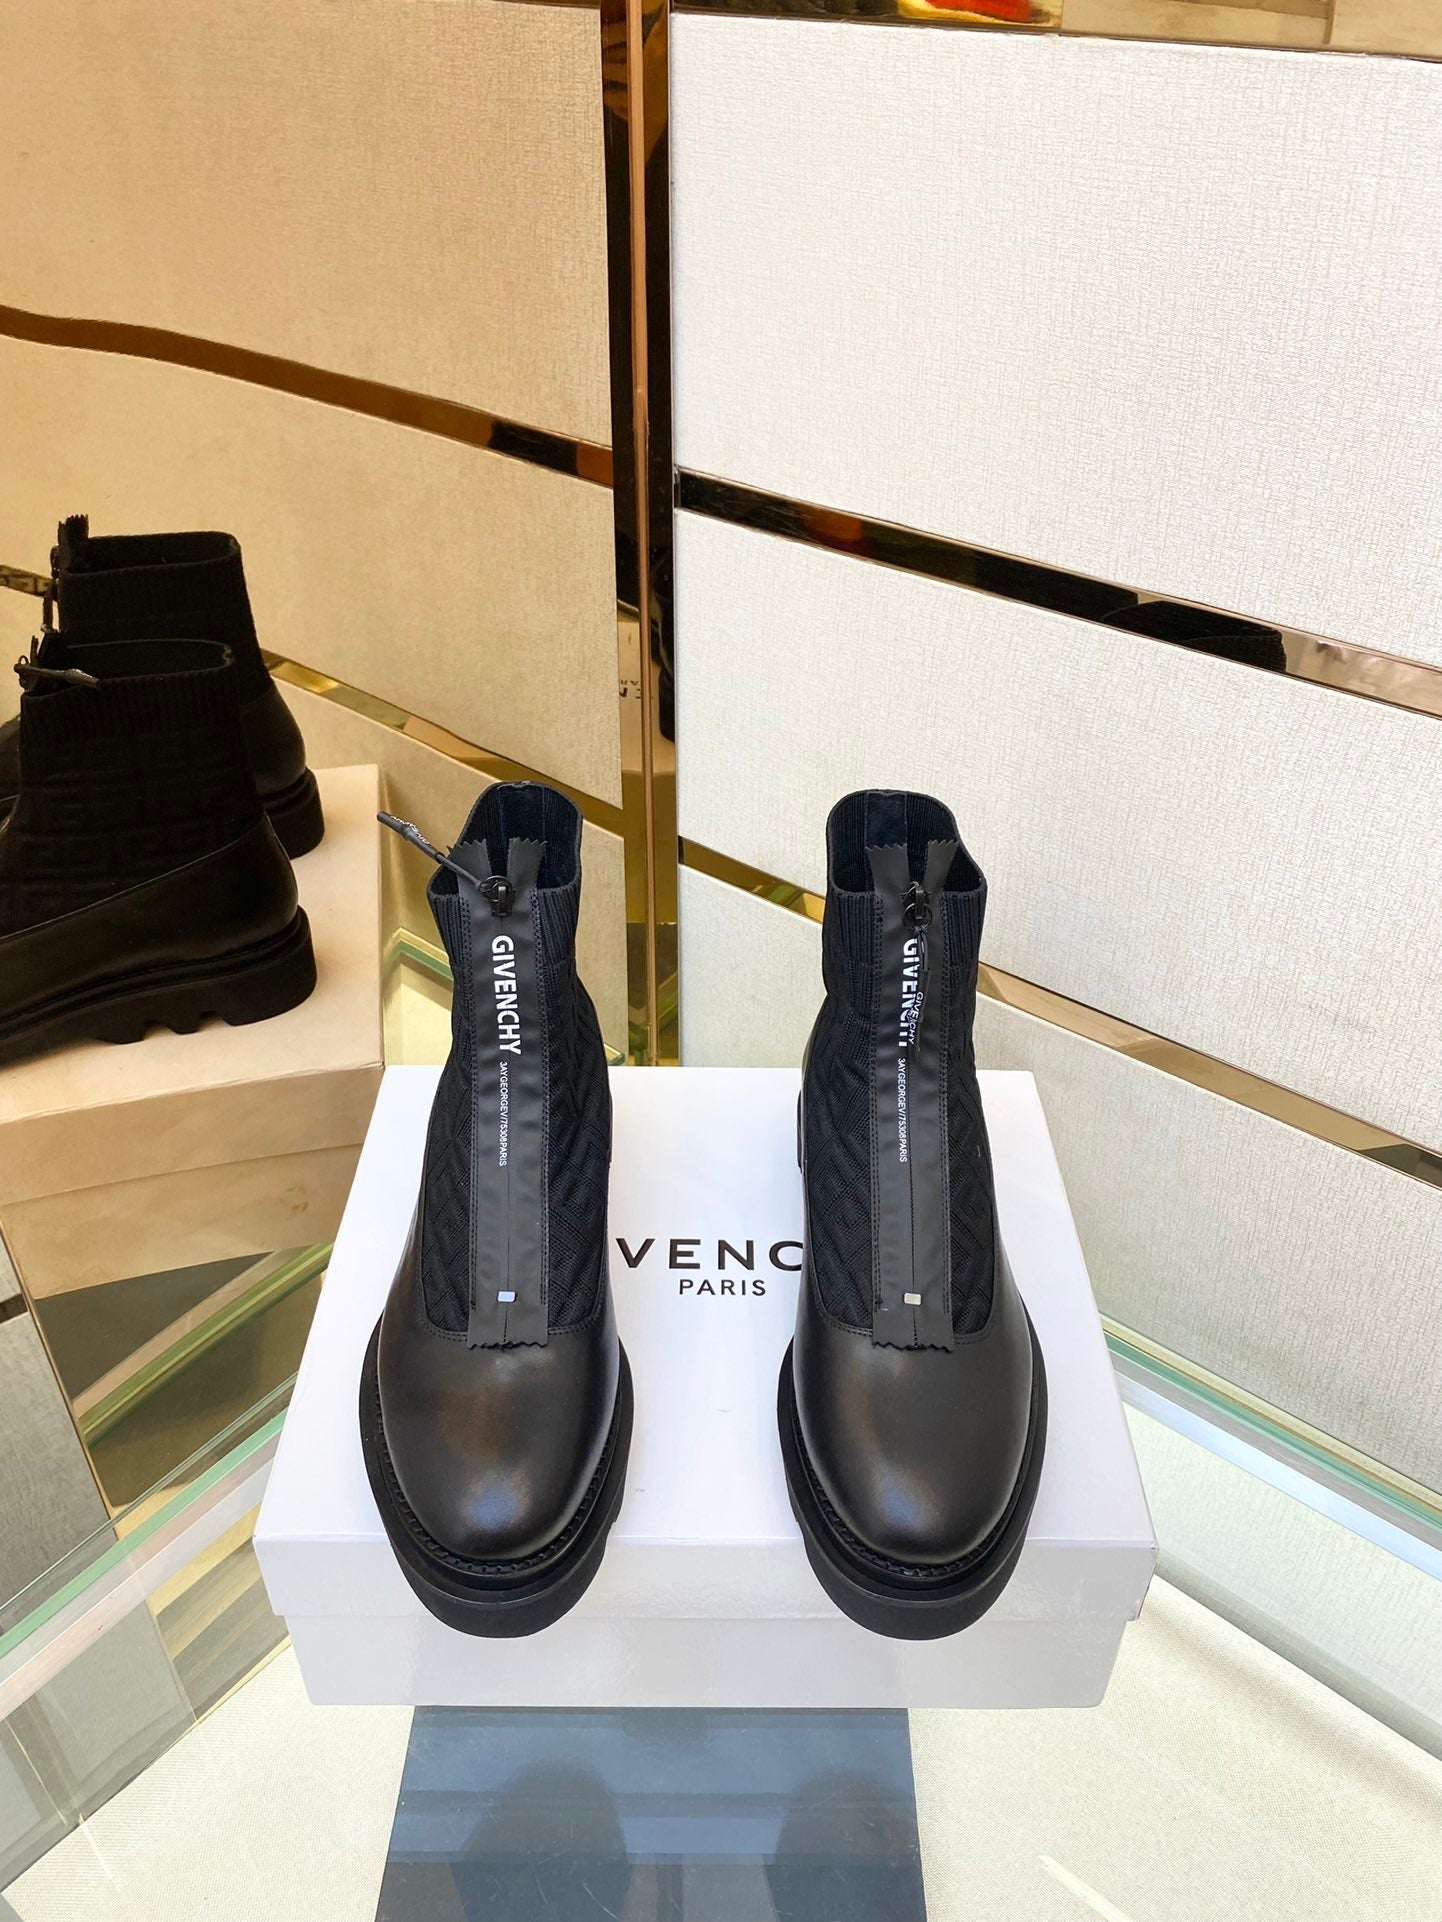 GIVENCHY  Boots  Unisex